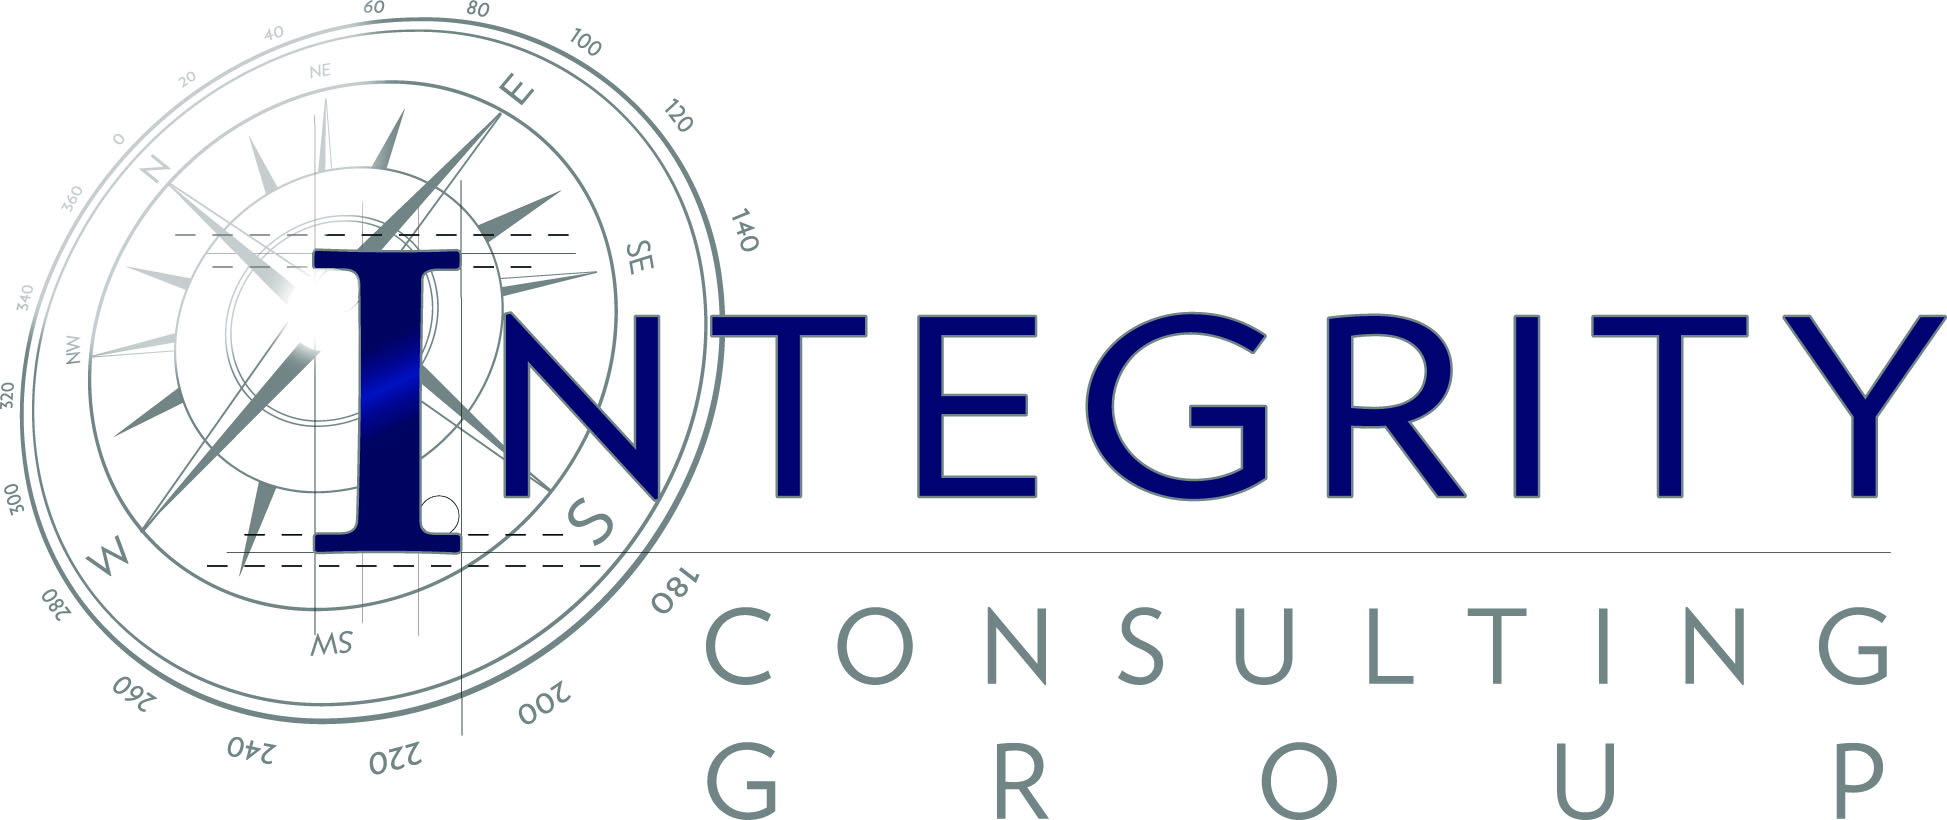 Integrity Consulting Group